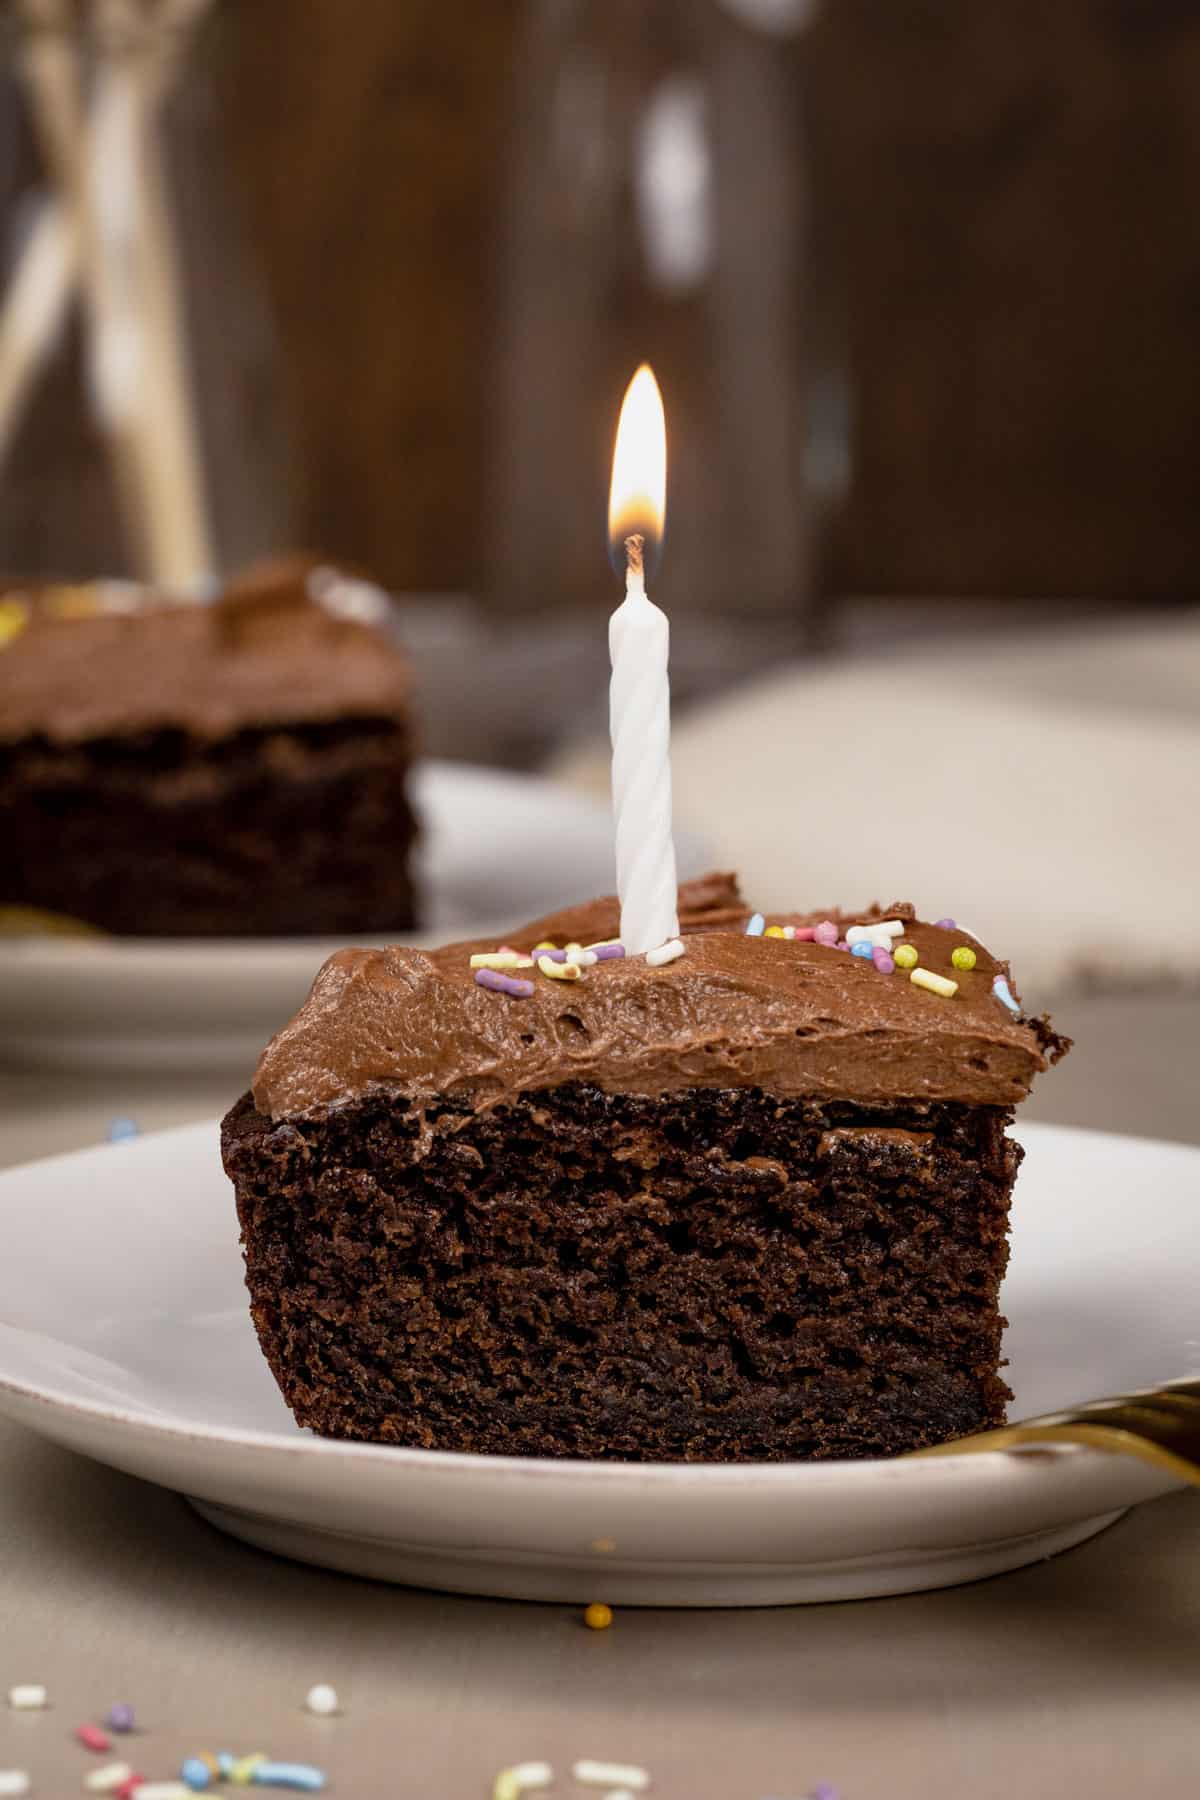 A slice of chocolate sheet cake on a small plate with a white candle on top that is lit. Sprinkles are on top of the cake and scattered around the plate. More slices are blurred in the background.